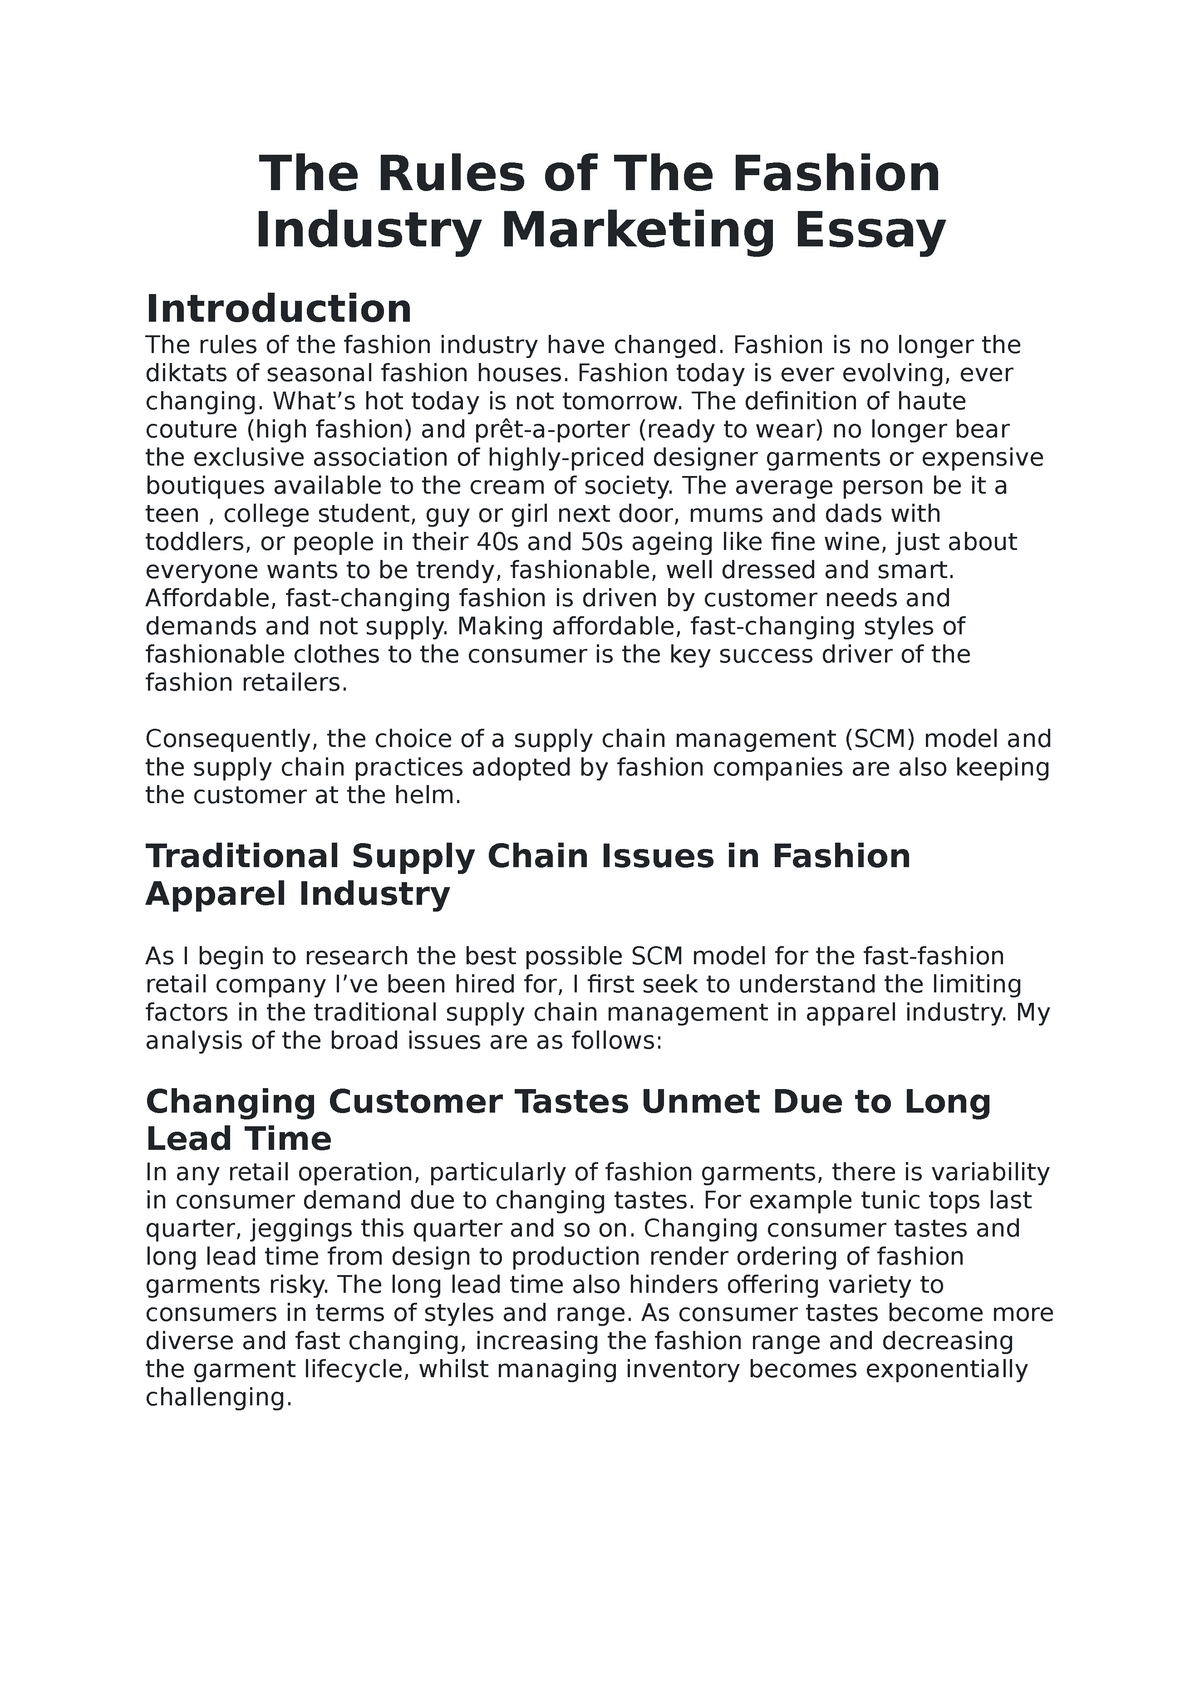 essay questions on fashion industry